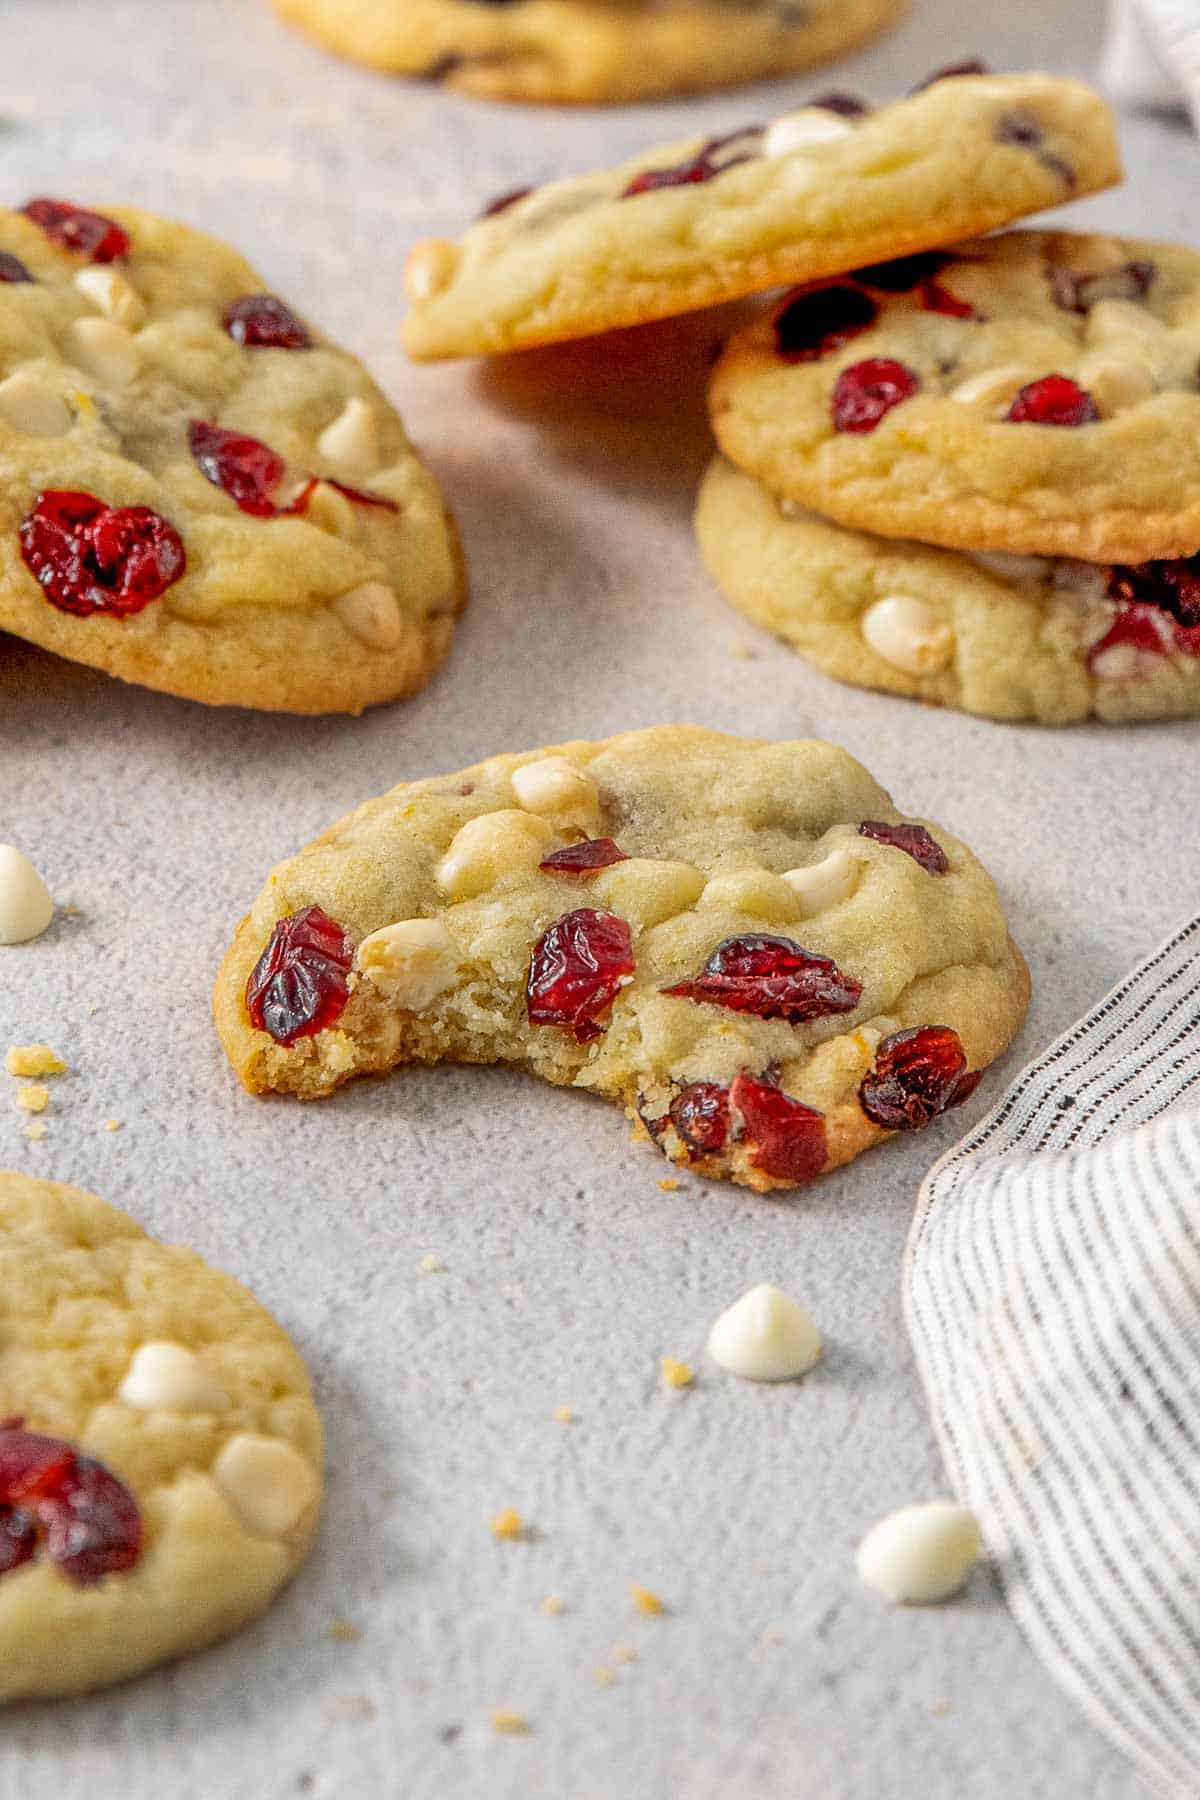 A white chocolate cranberry cookie with a bite taken out surrounded by several other cookies.